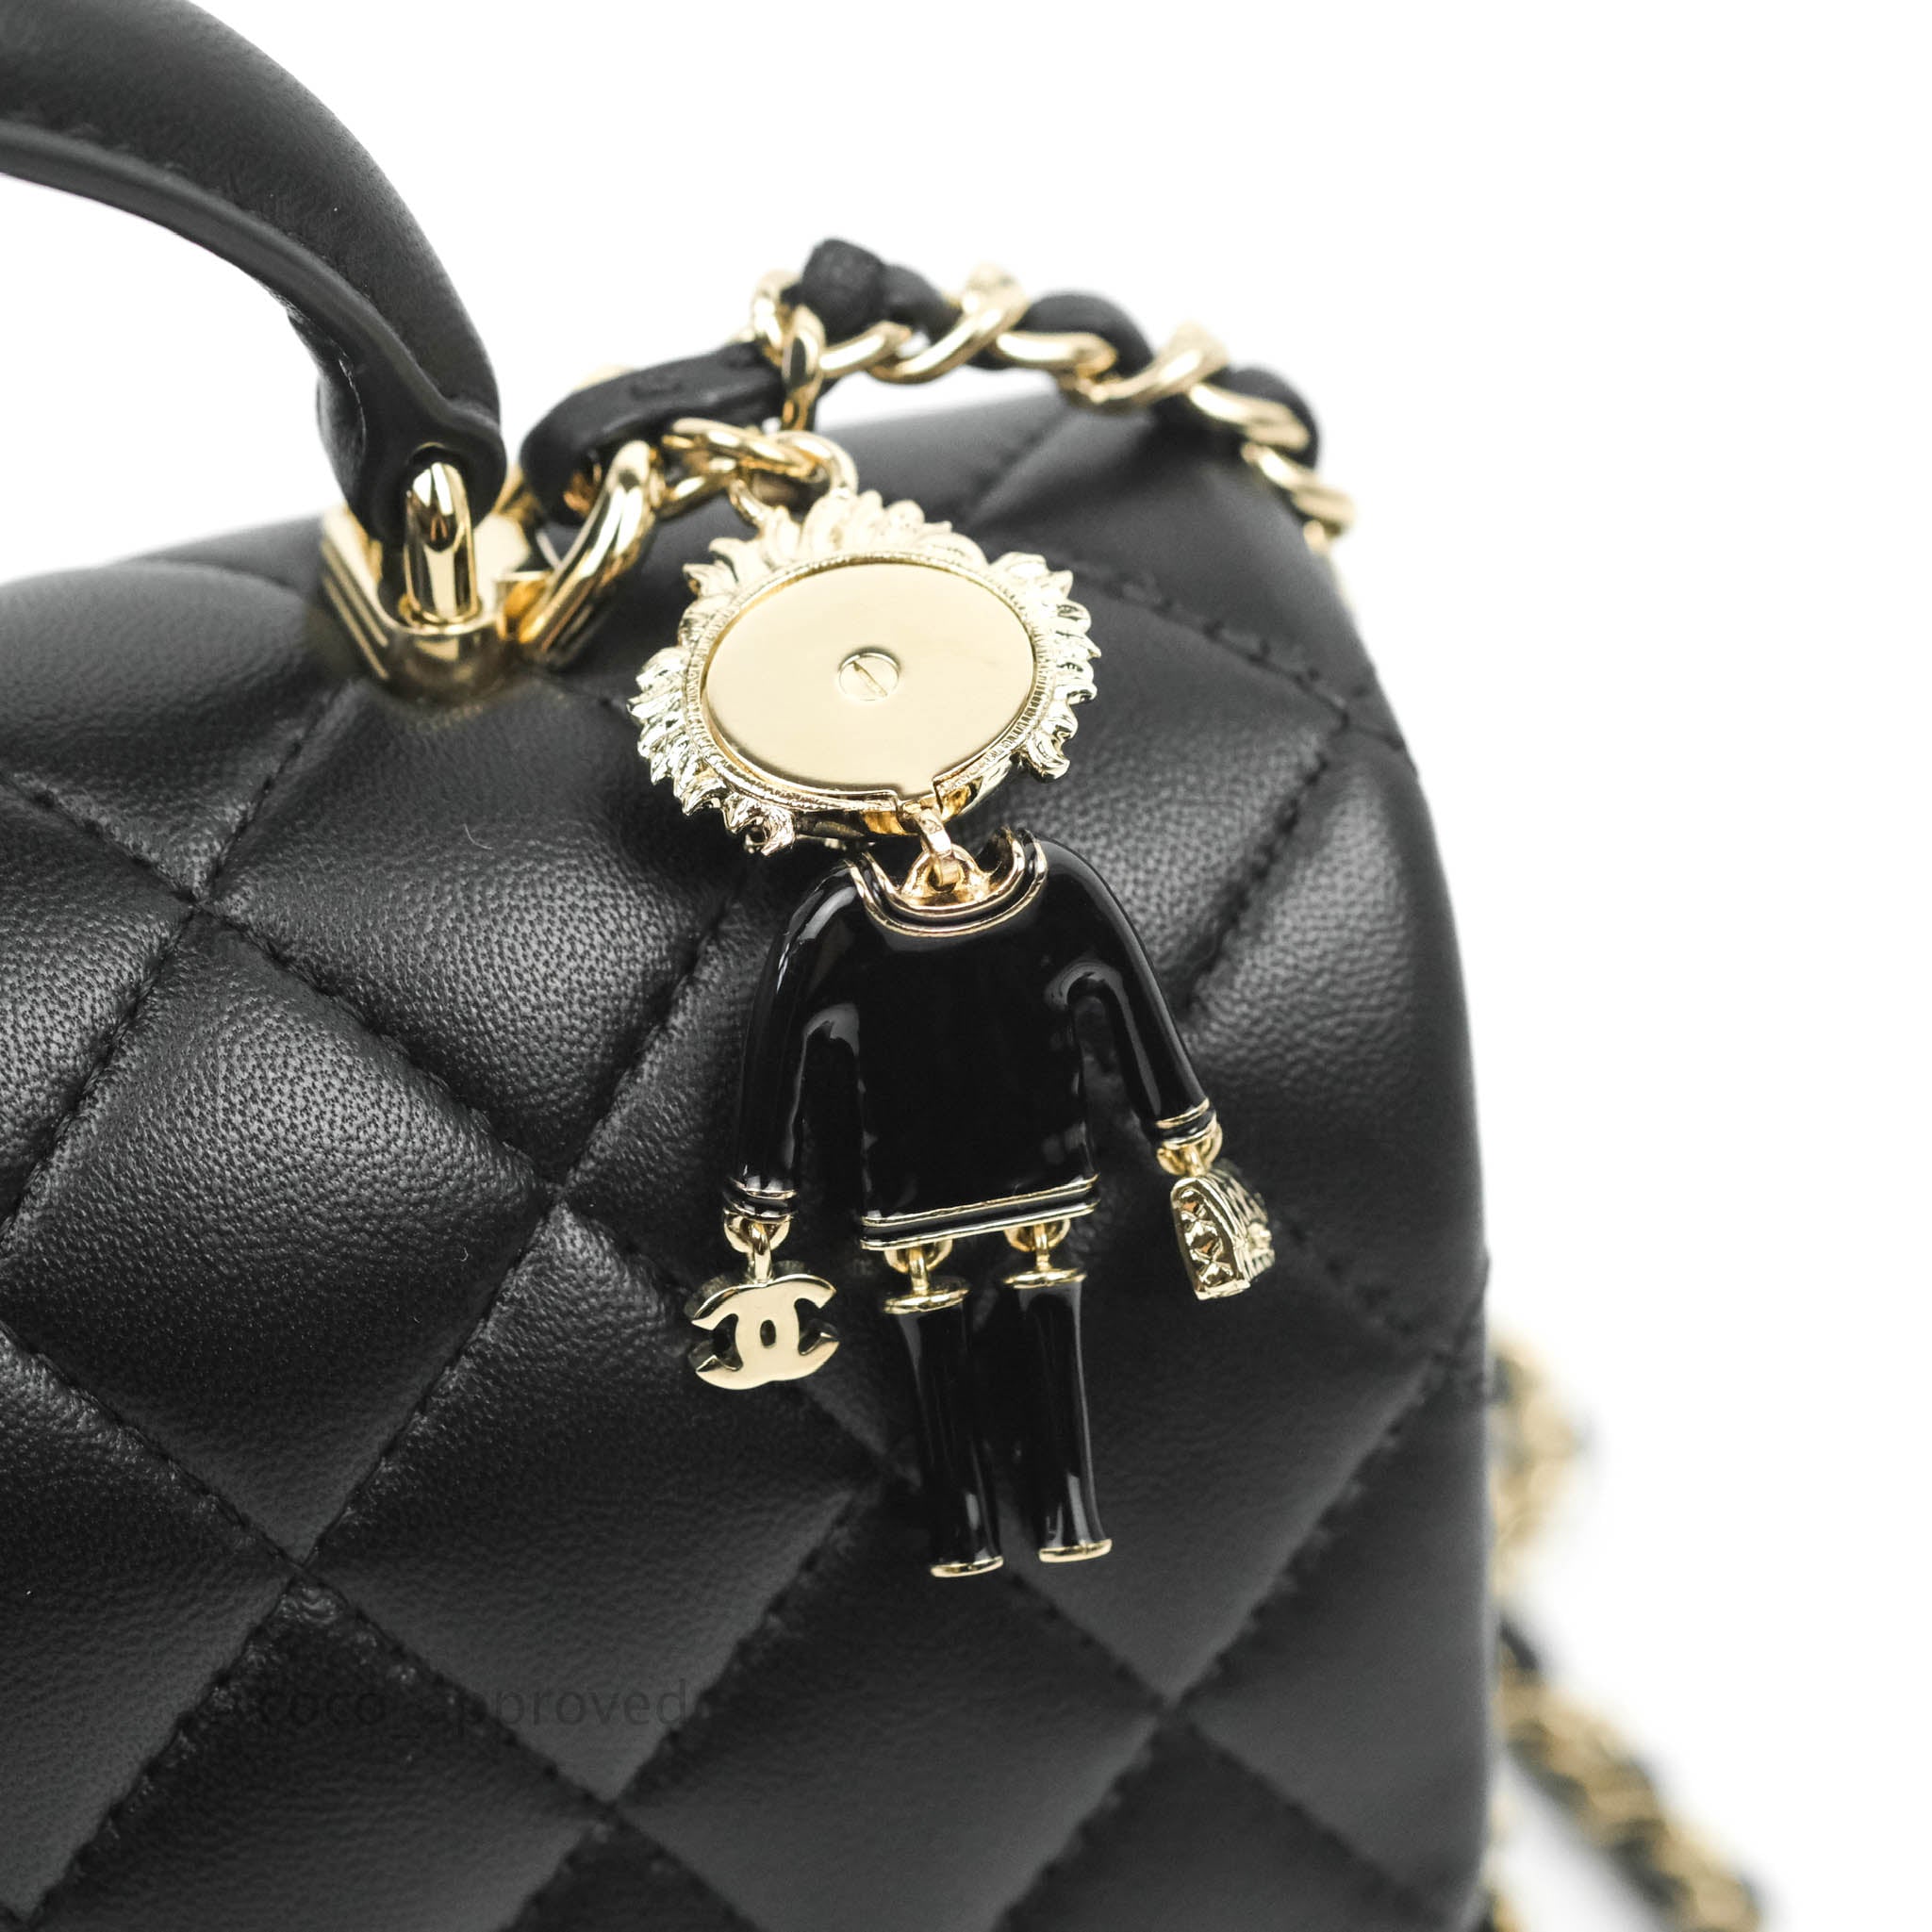 Chanel Black Quilted Leather Knock On Wood Top Handle Bag Chanel | The  Luxury Closet